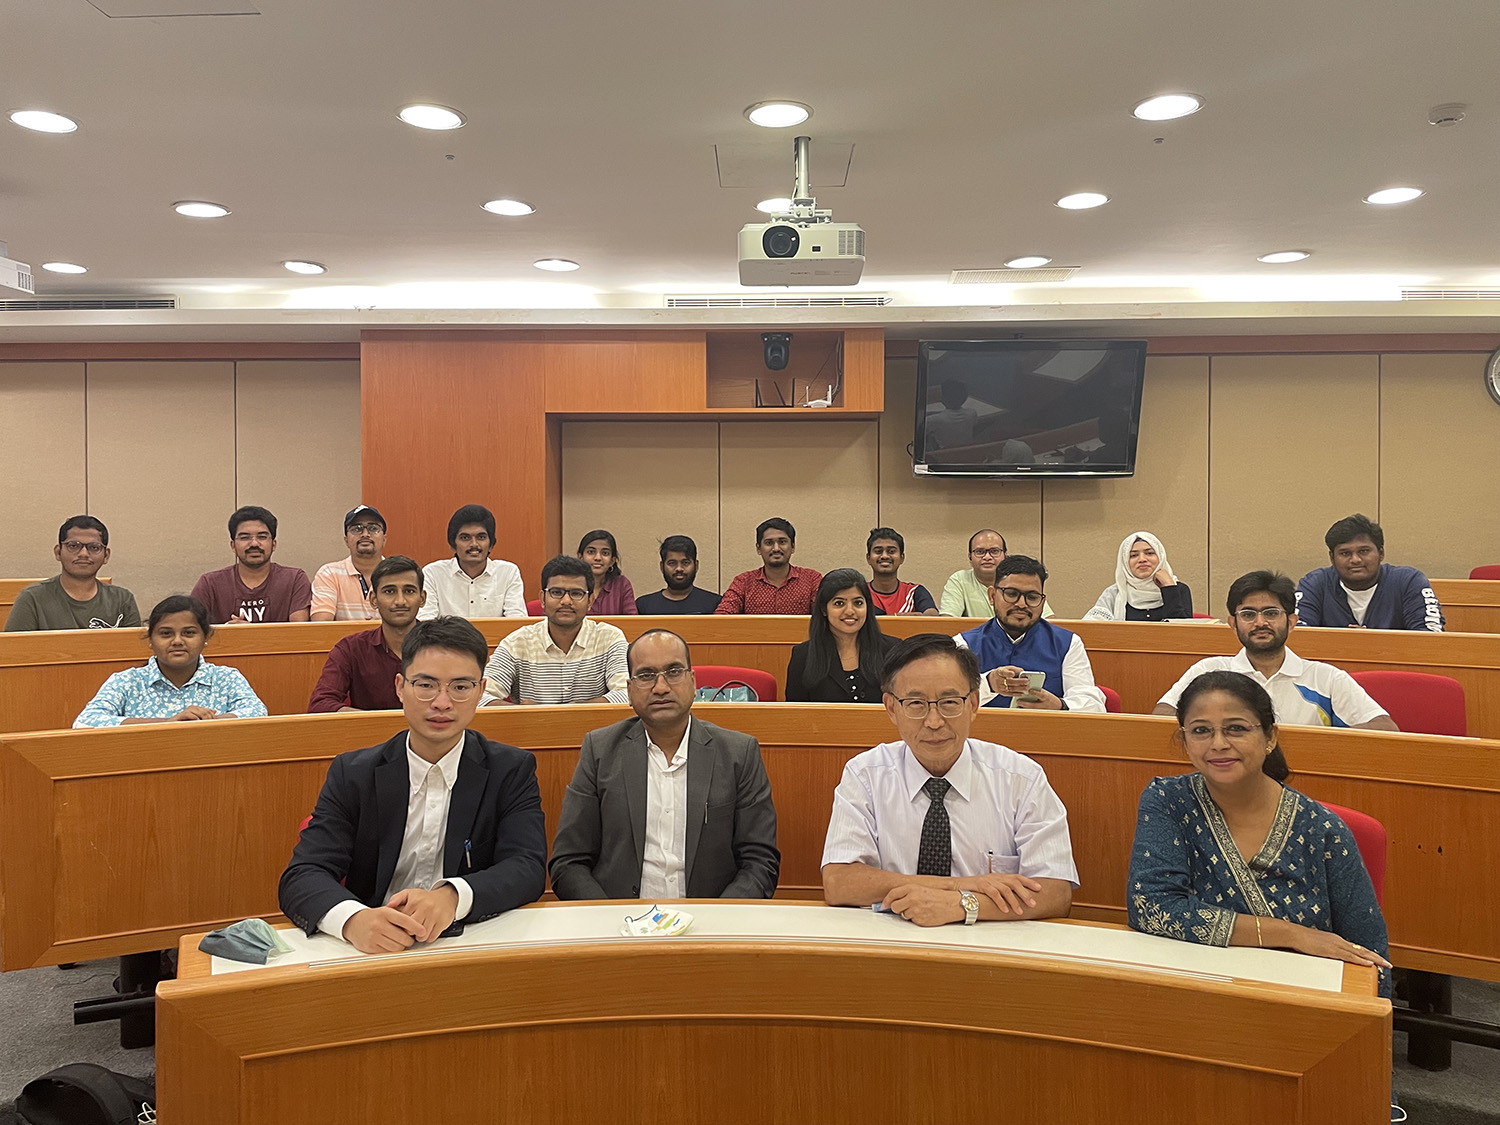 (From right to left) Nandana Biswas, wife of former Indian Deputy Representative to Taiwan, Ying-Hui Chen, Dean of Asia University International College, Sujeet Kumar, Member of Parliament of India, and Ting-Wei Xu, Department of Asia and Pacific Affairs of the Ministry of Foreign Affairs, meet with Indian teachers and students at Asia University